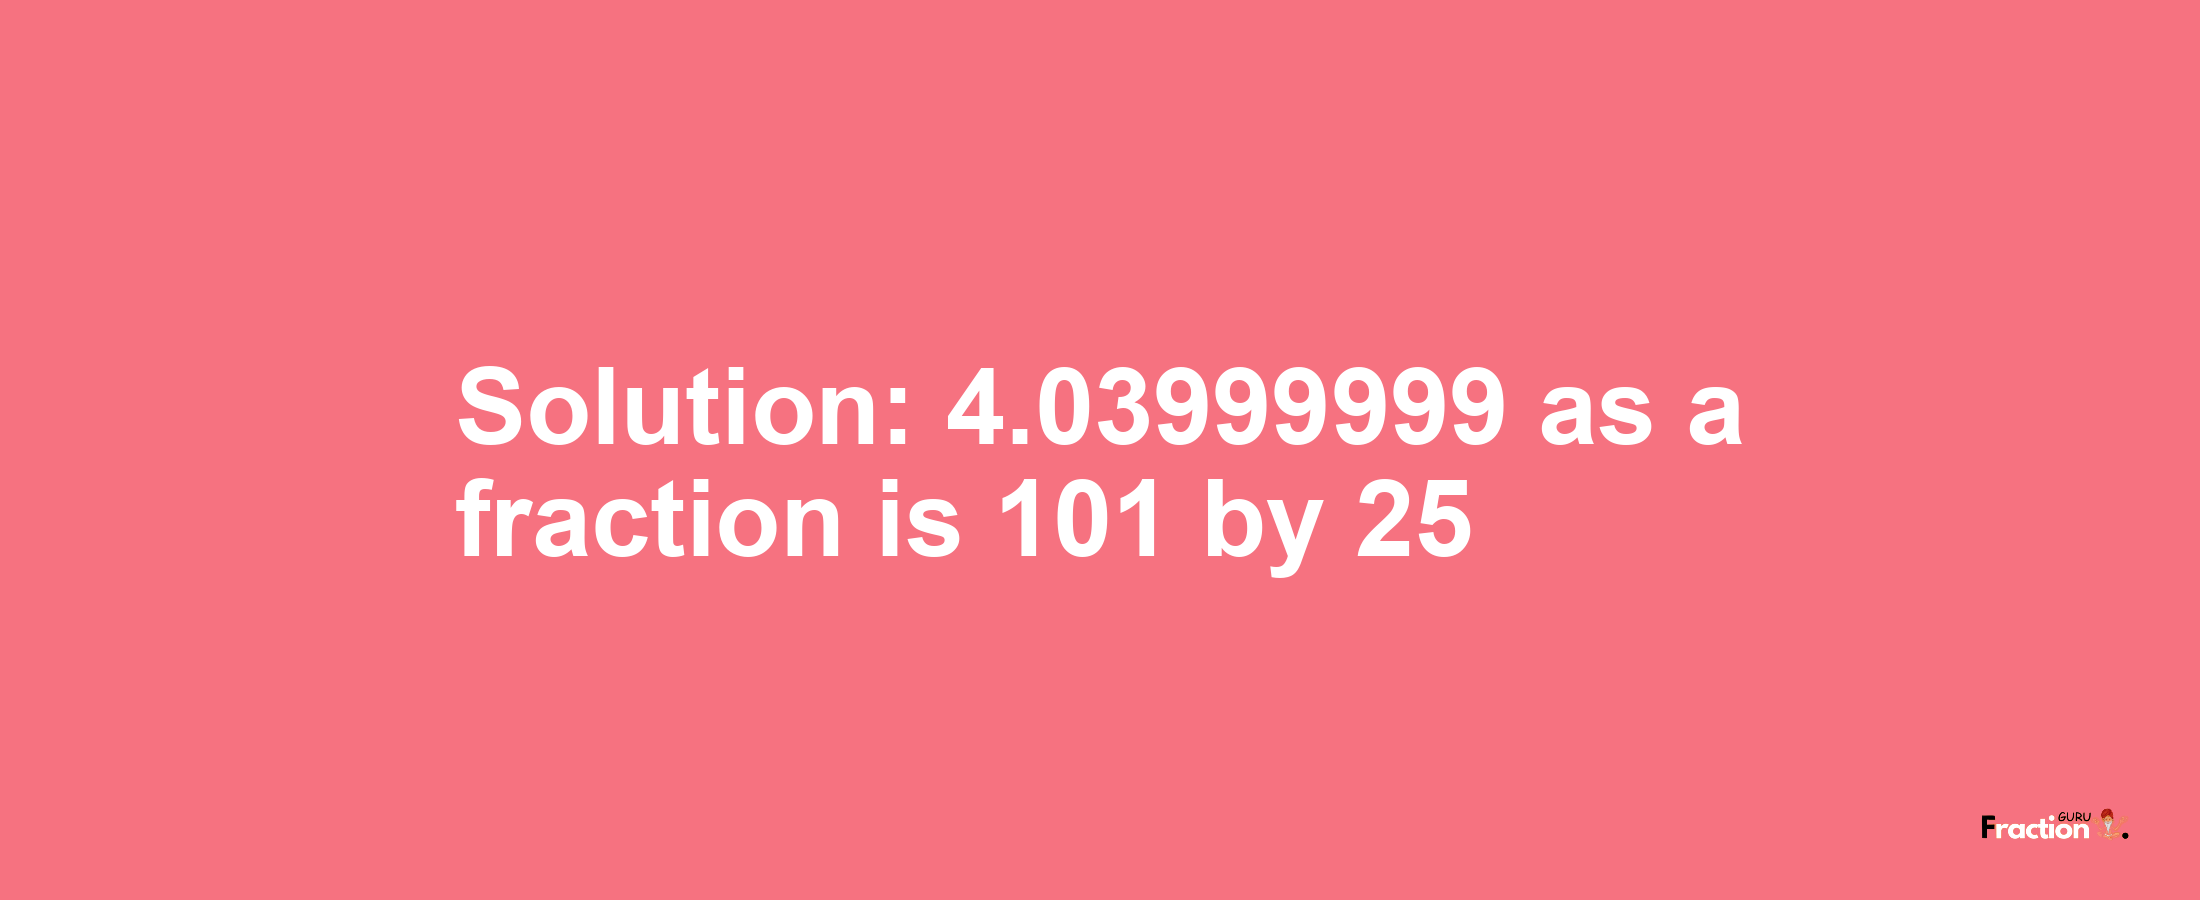 Solution:4.03999999 as a fraction is 101/25